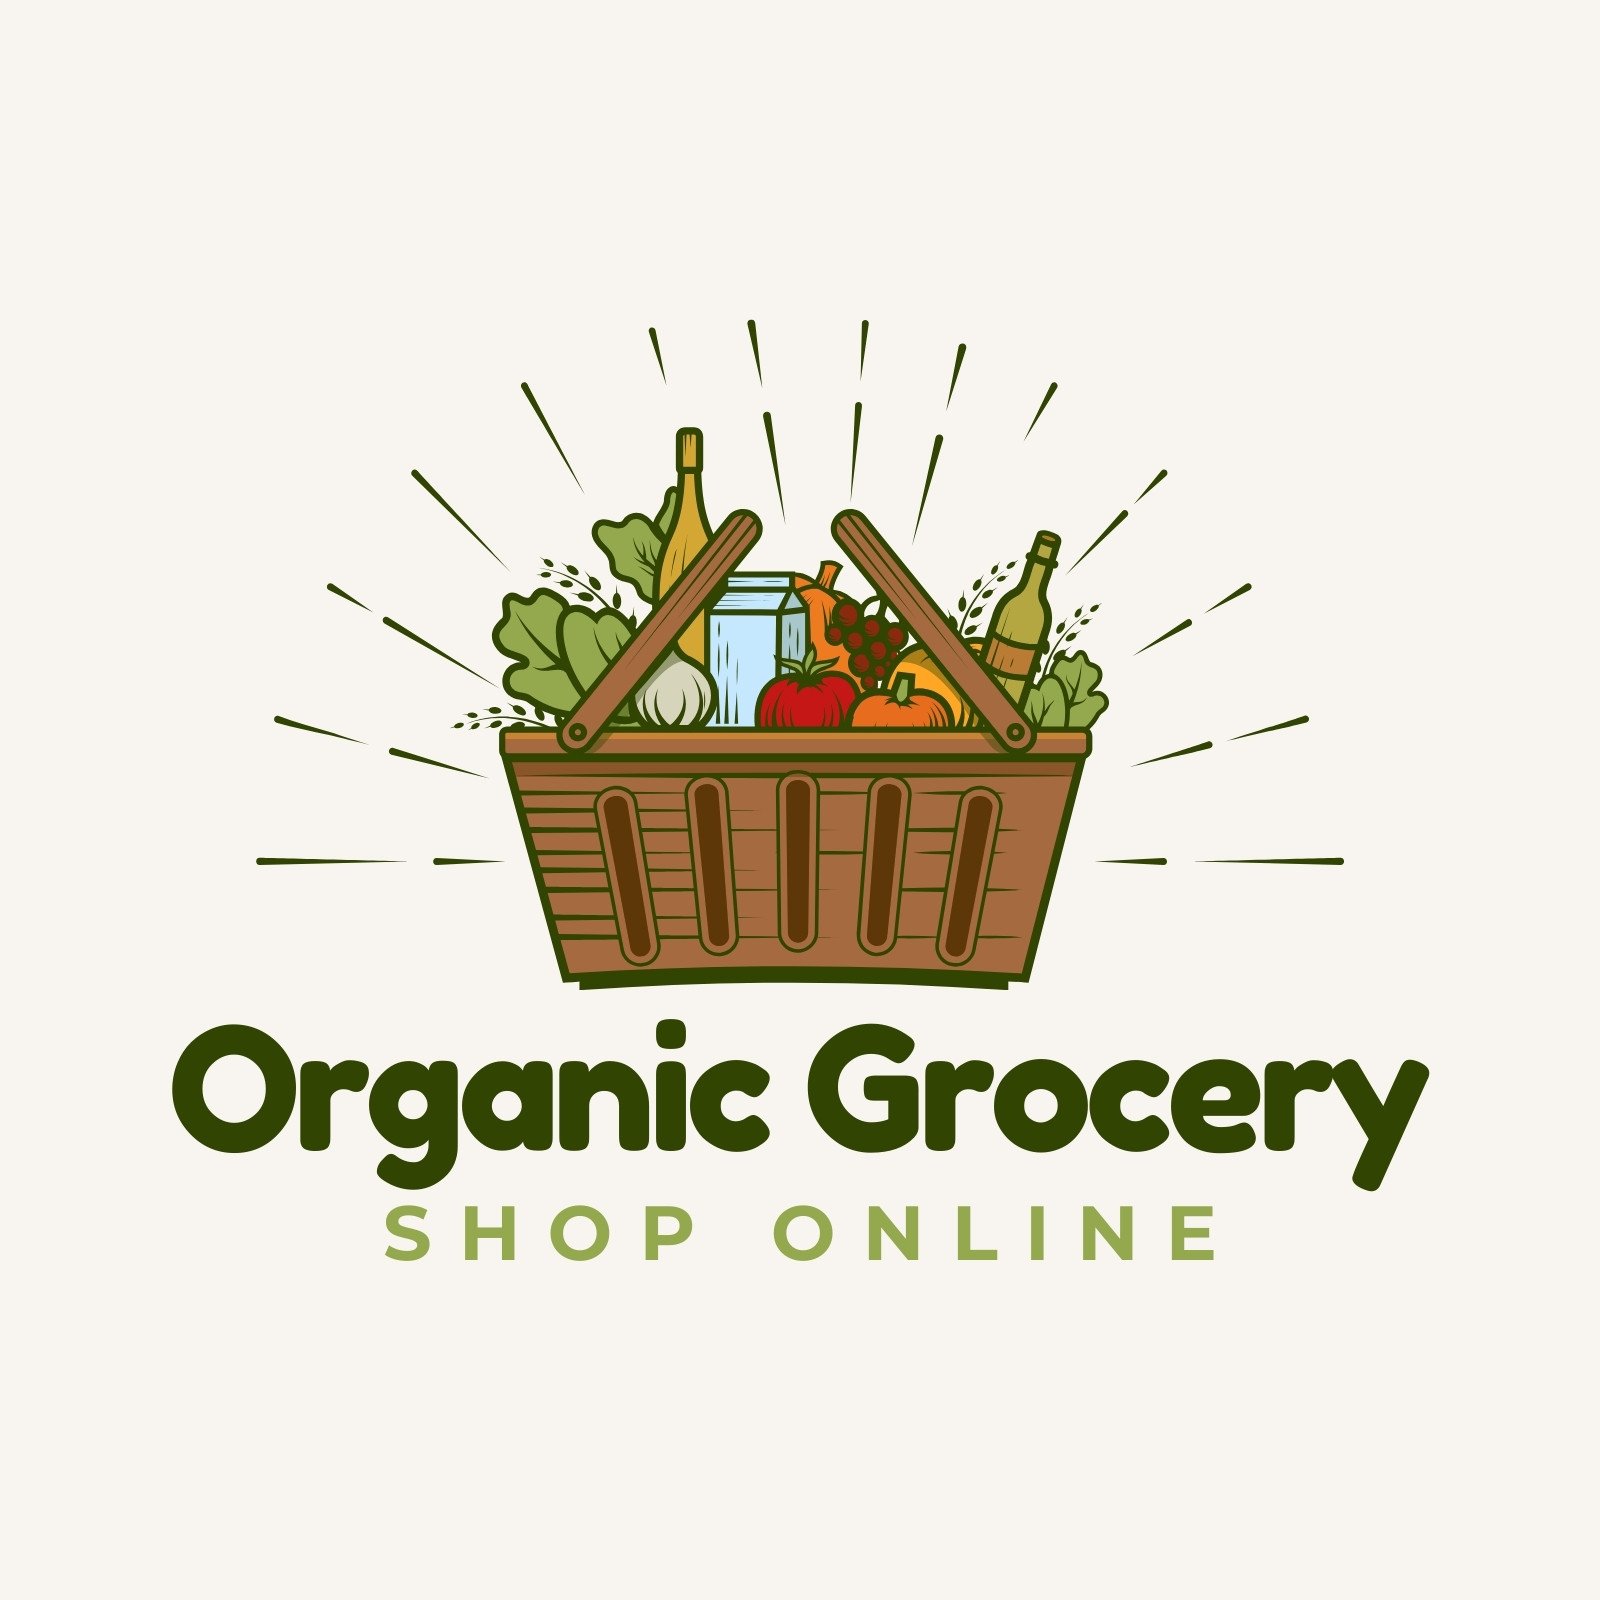 grocery in cart included with stars | Logo Template by LogoDesign.net